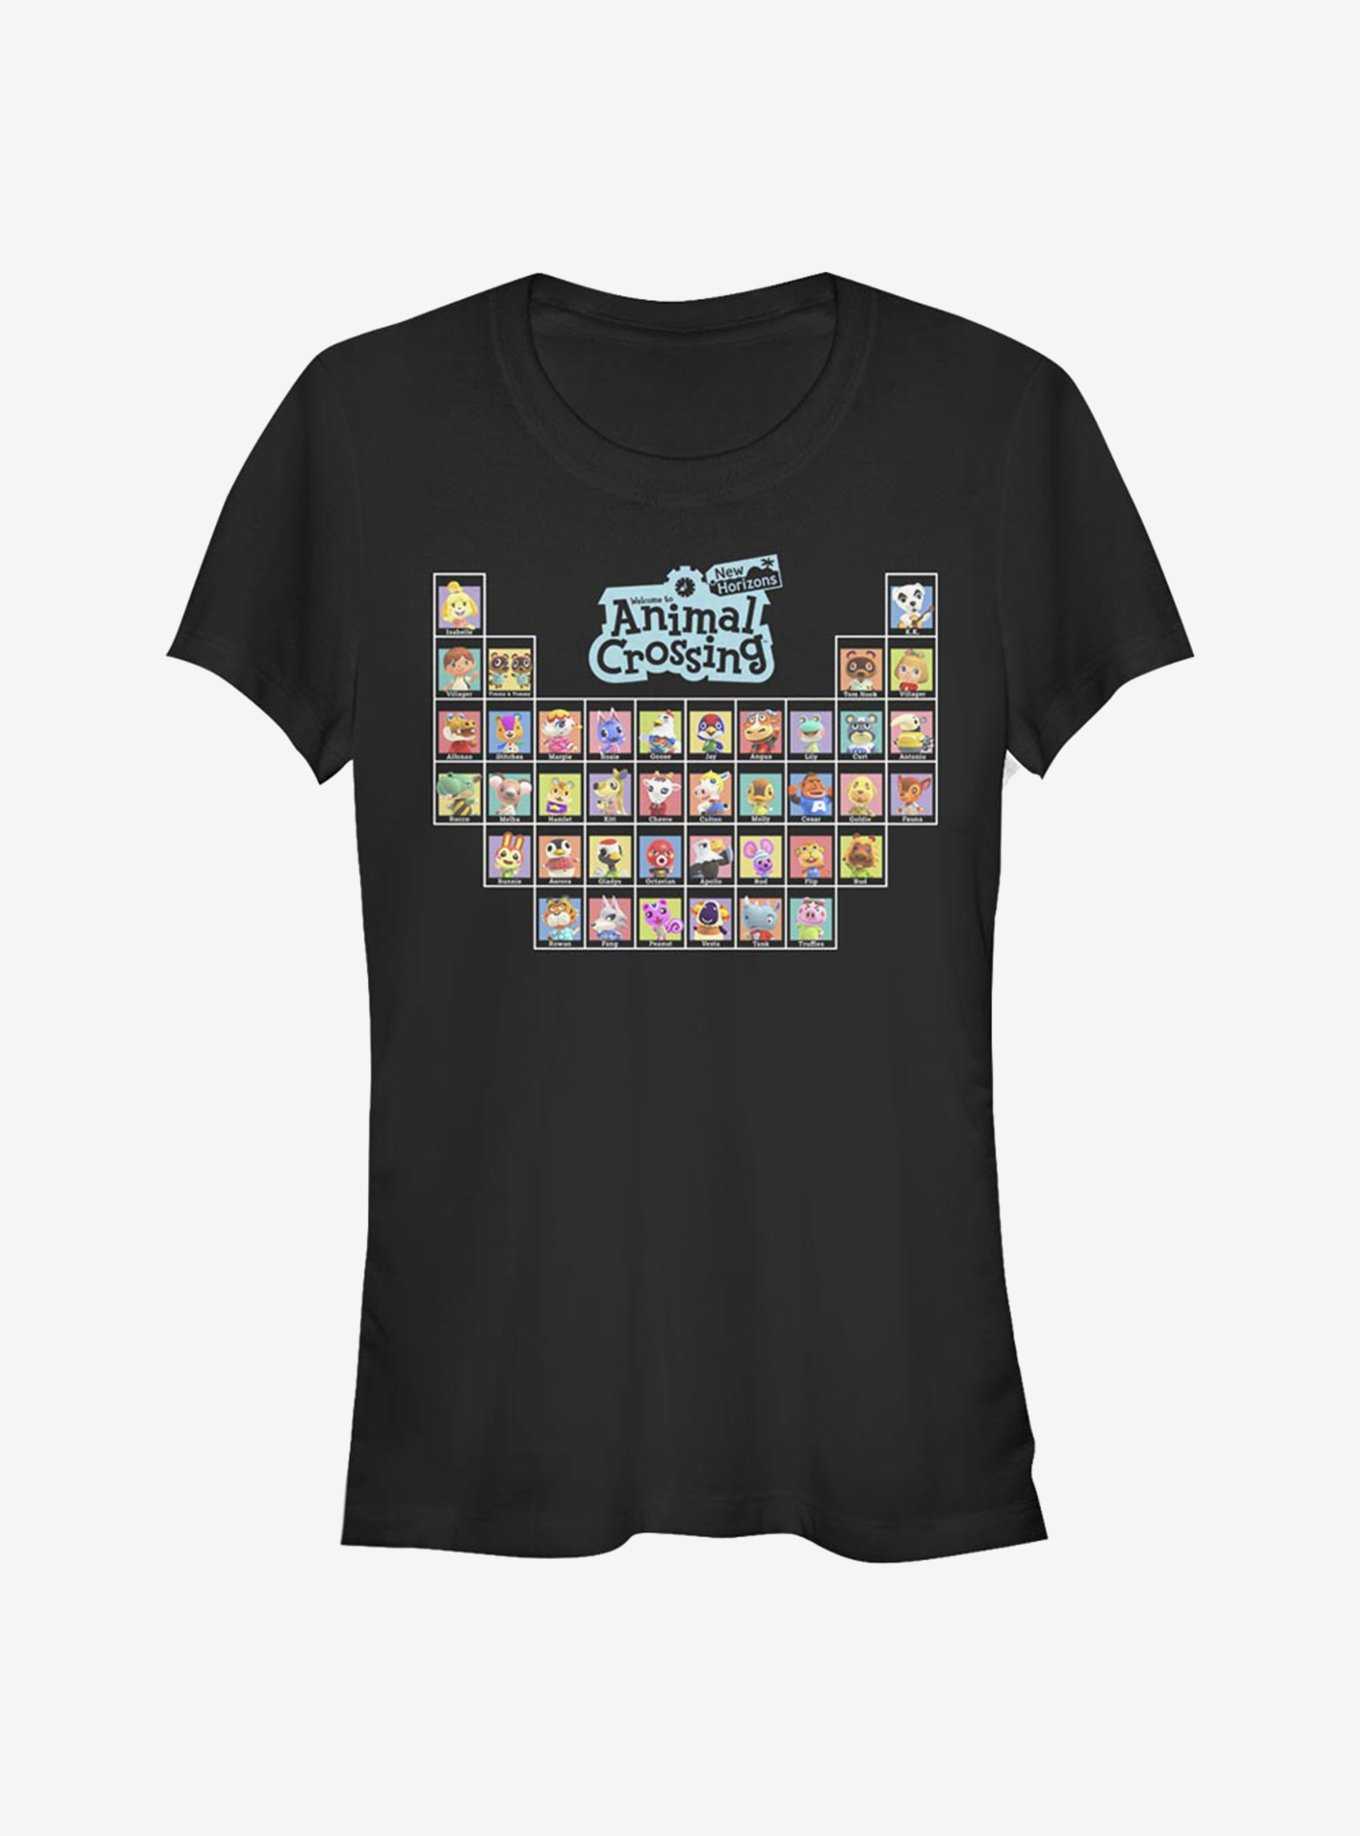 Animal Crossing: New Horizons Table Of Villagers Girls T-Shirt, BLACK, hi-res